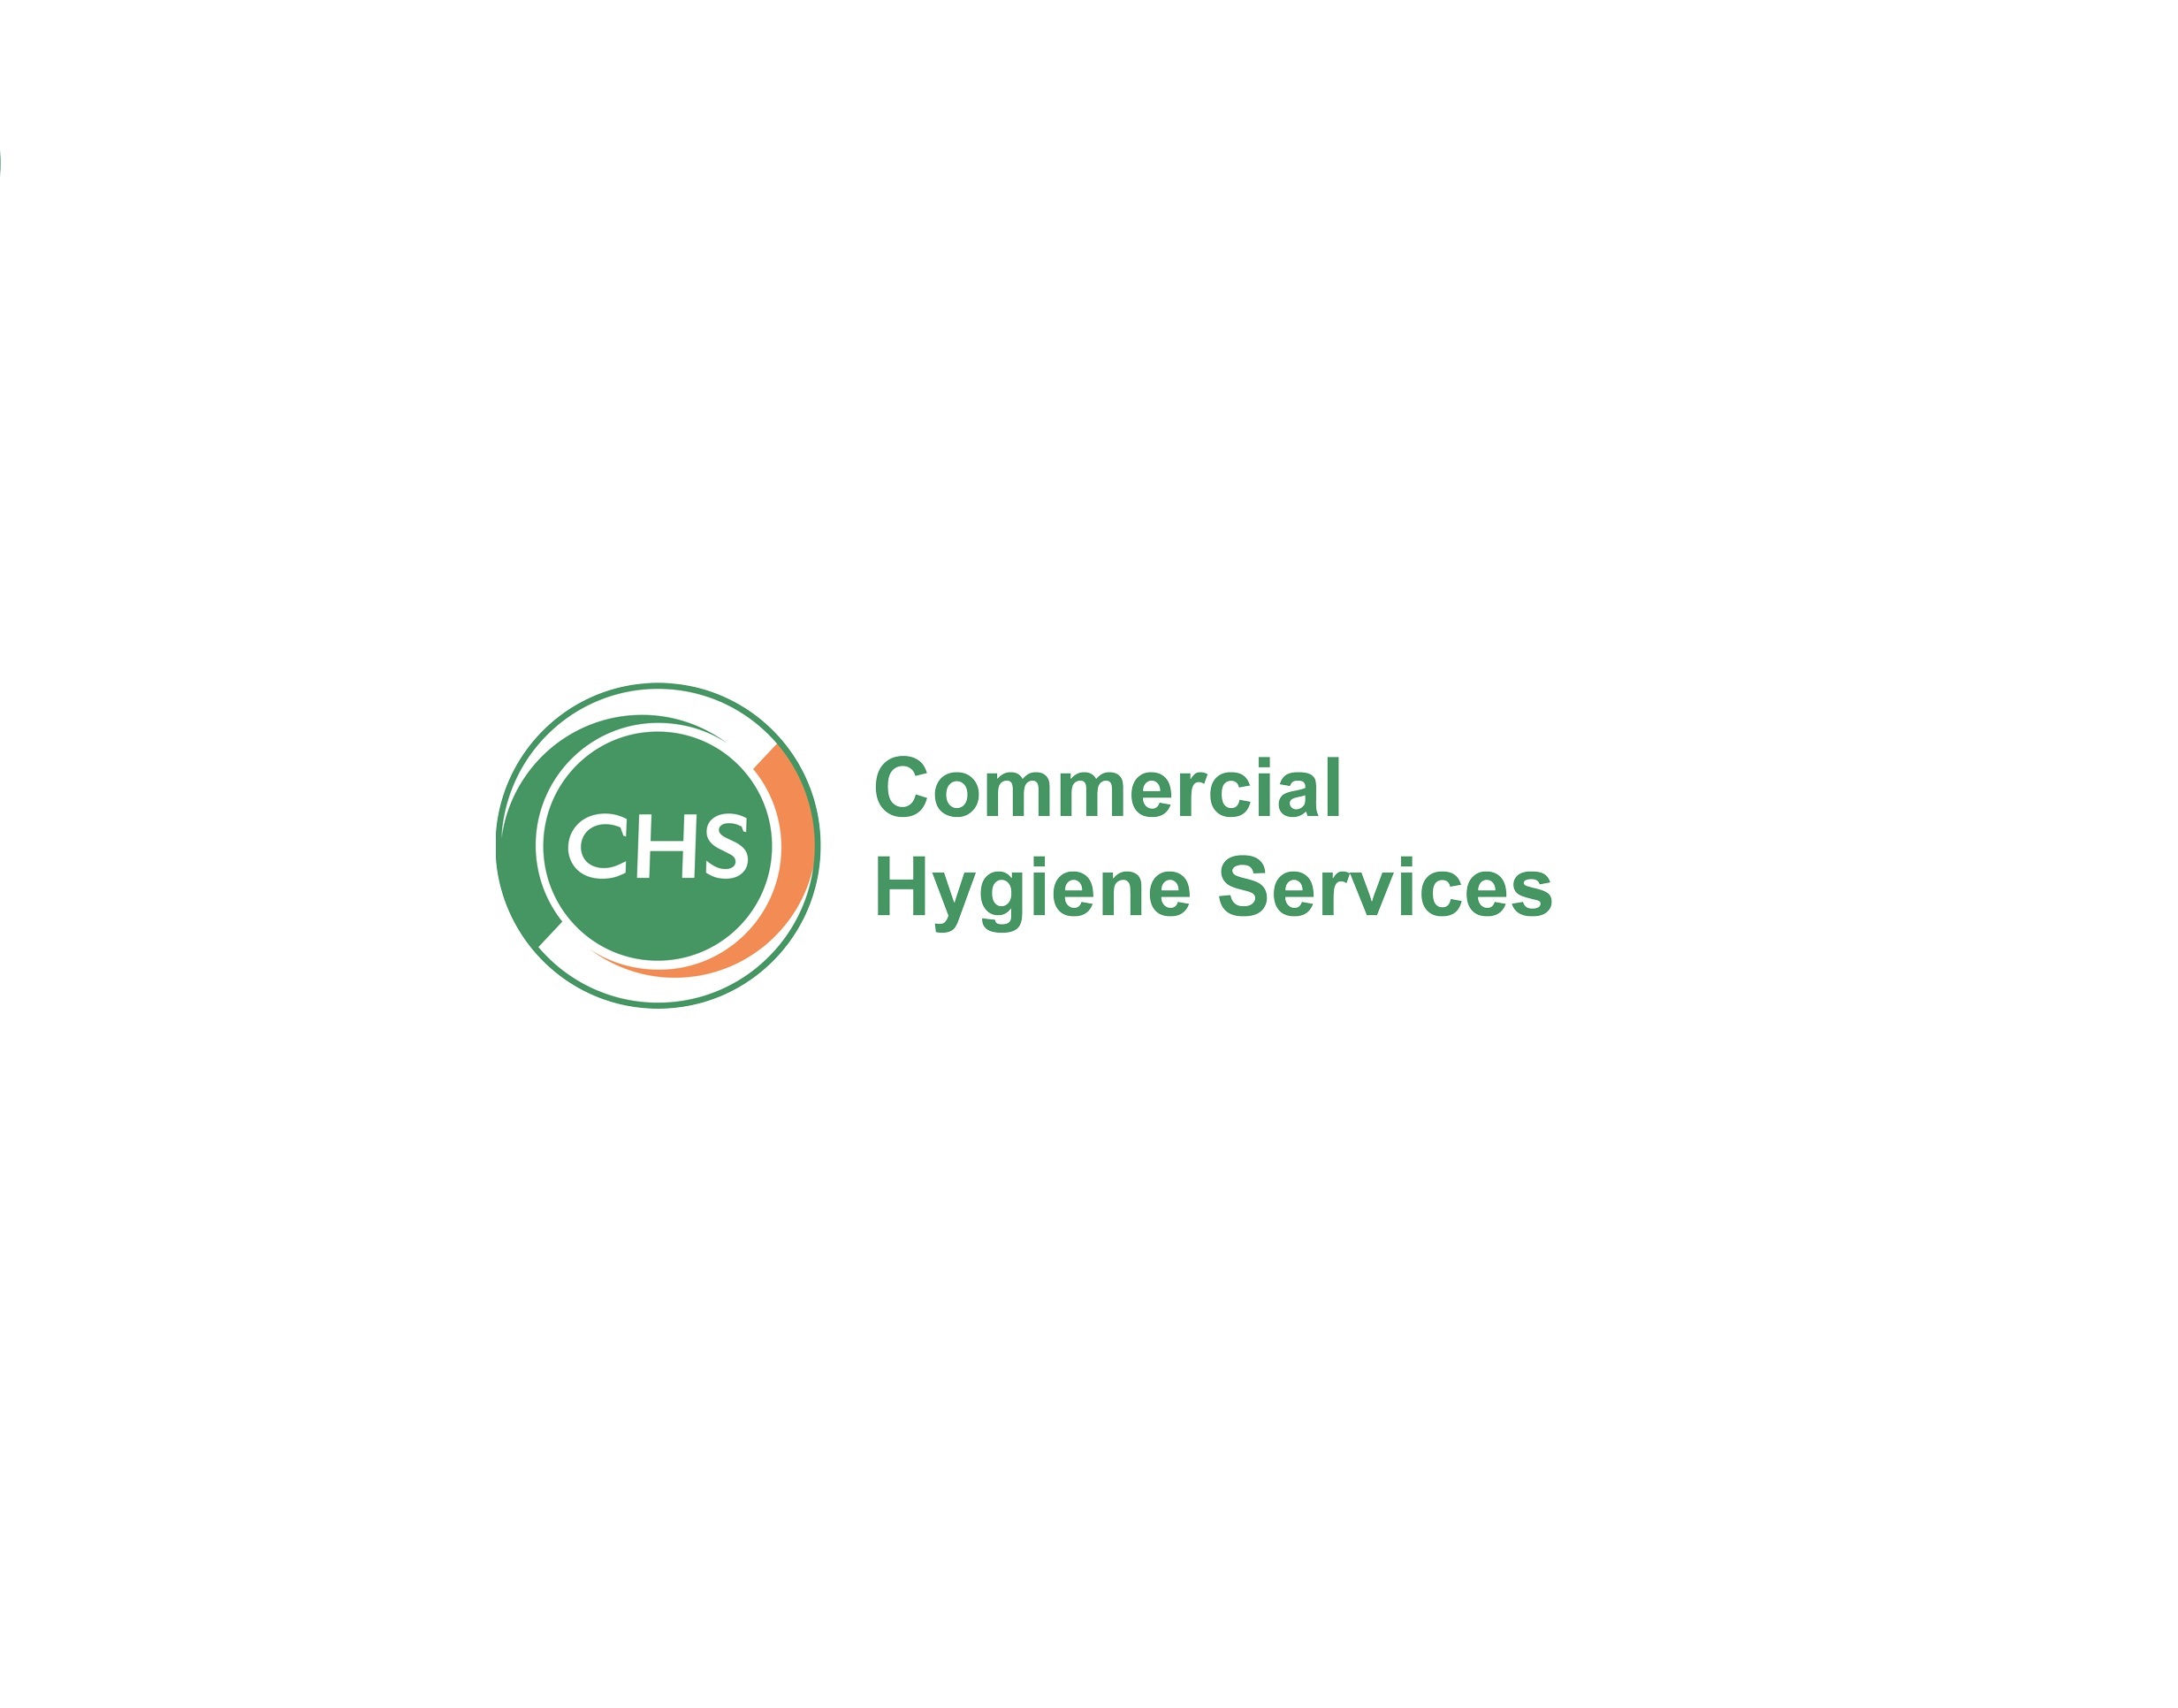 Commercial Hygiene Services